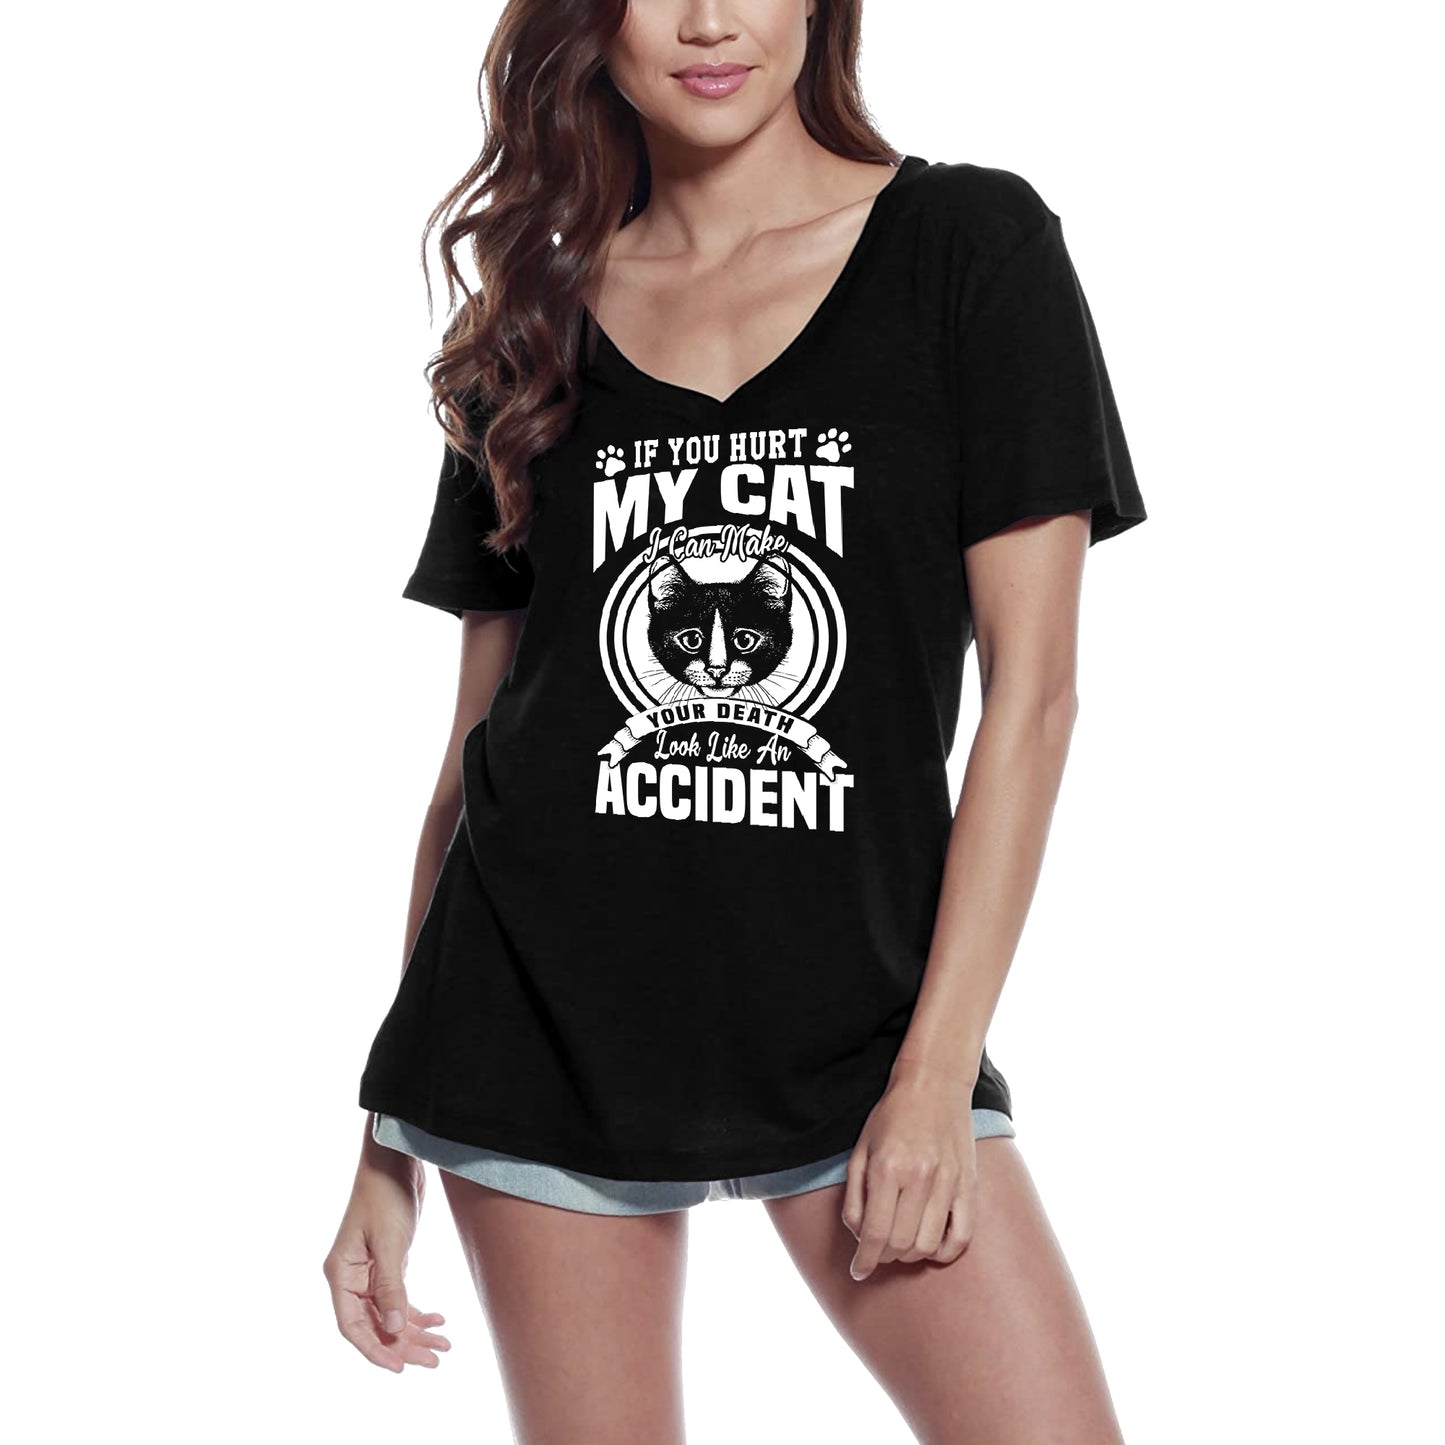 ULTRABASIC Women's T-Shirt If You Hurt My Cat I Can Make Your Death Look Like an Accident - Funny Kitten Shirt for Cat Lovers